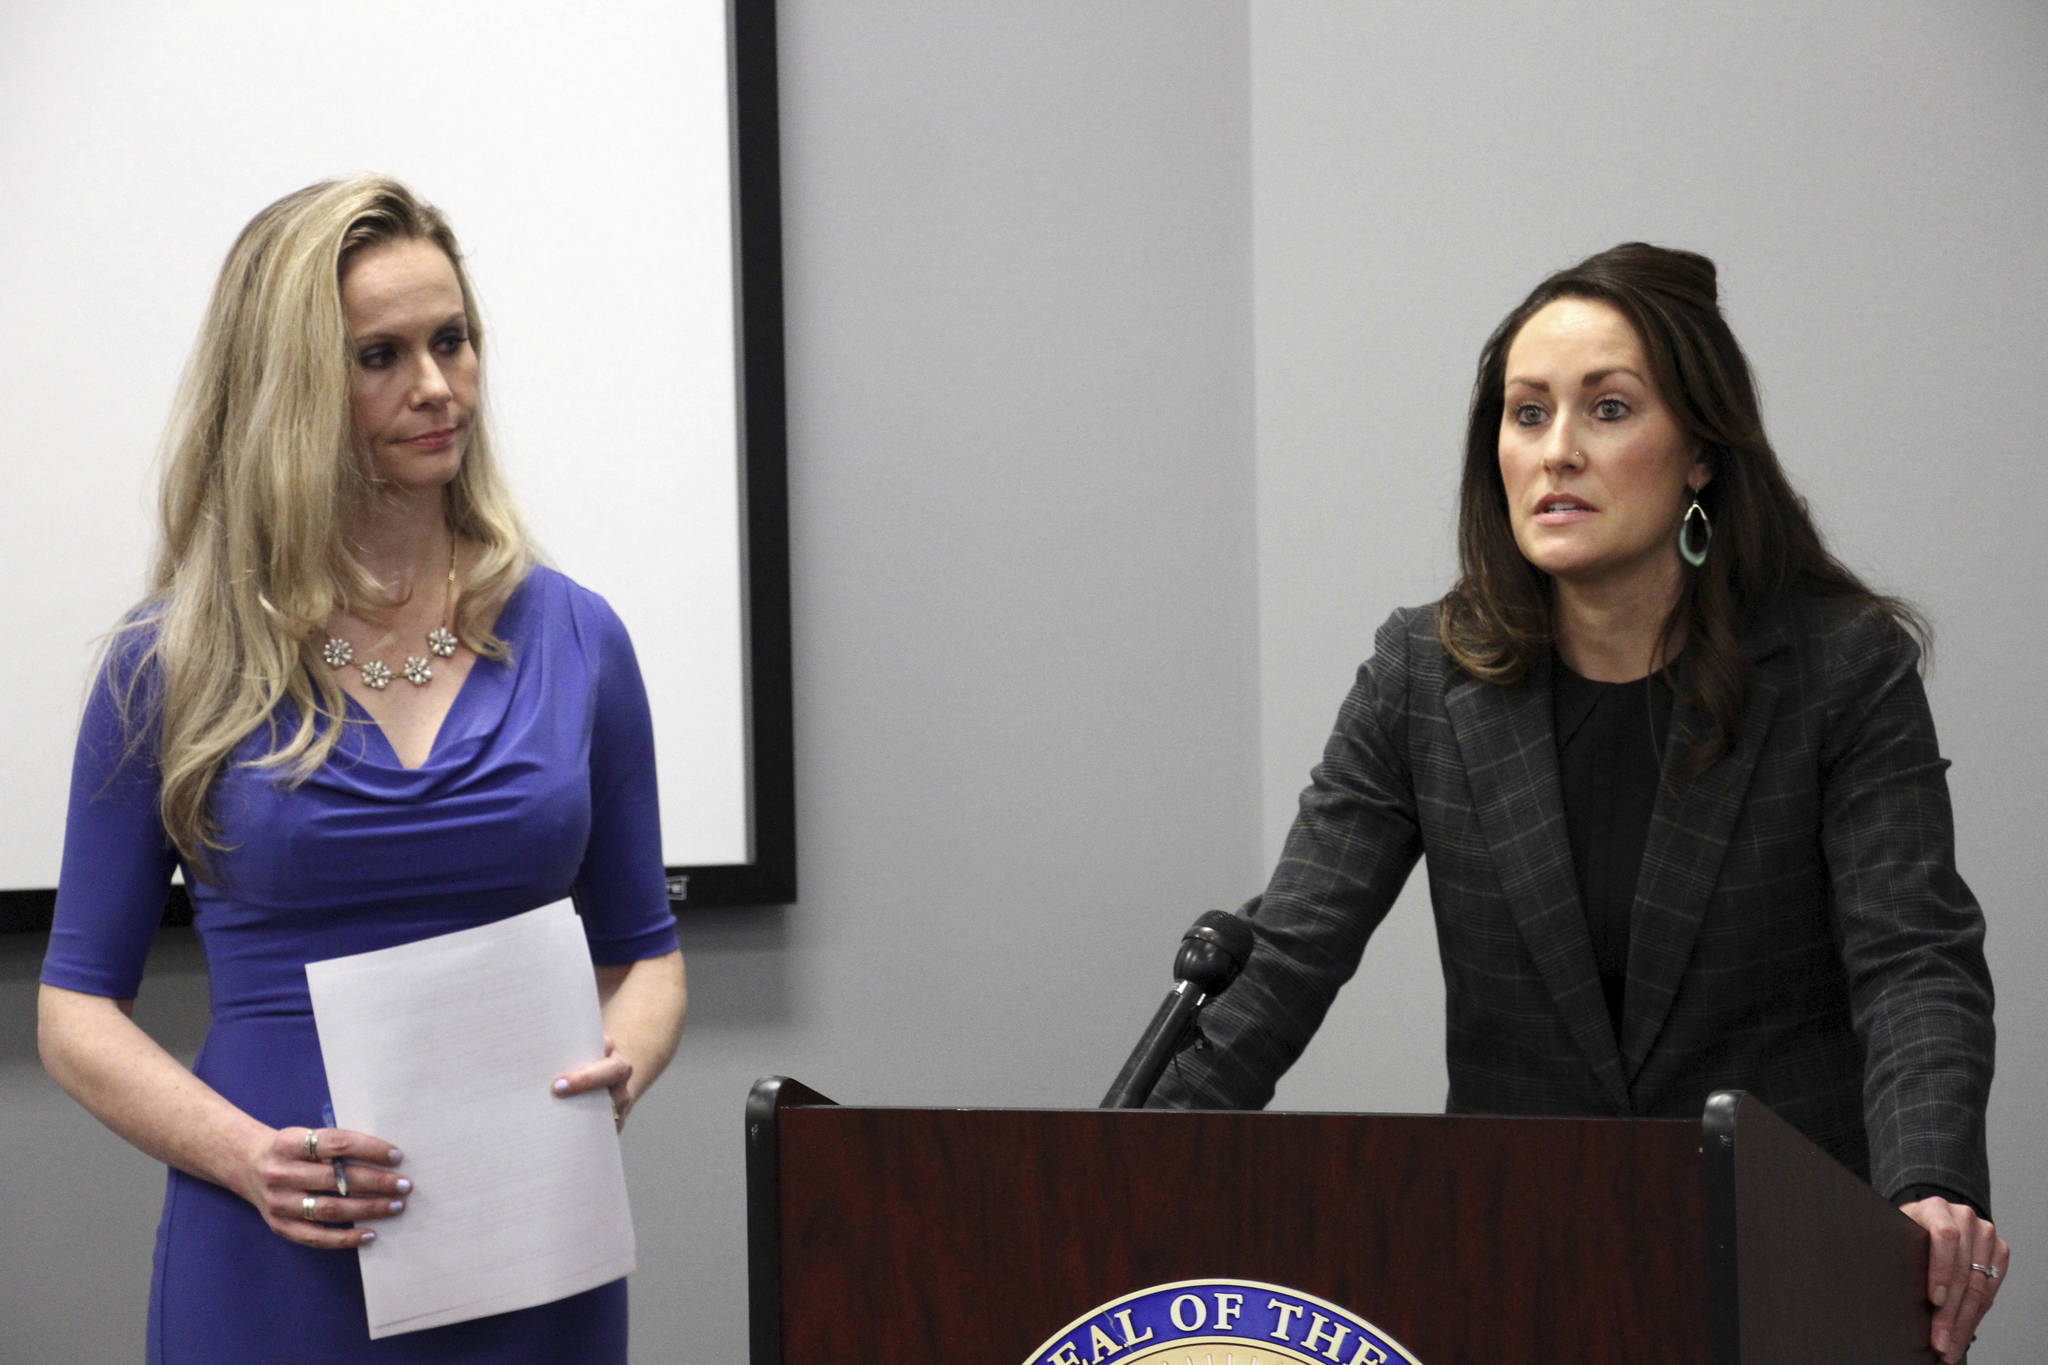 Alaska Department of Administration Commissioner Kelly Tshibaka, left, and Alaska Public Defender Samantha Cherot discuss a report Monday, Nov. 4, 2019, in Anchorage, Alaska, that says the public defender agency is passing off more cases to the Office of Public Advocacy due to conflicts of interest with other cases or clients. The report from a state oversight unit says the number of conflicts jeopardizes the primary defense role the agency plays. (AP Photo/Mark Thiessen)